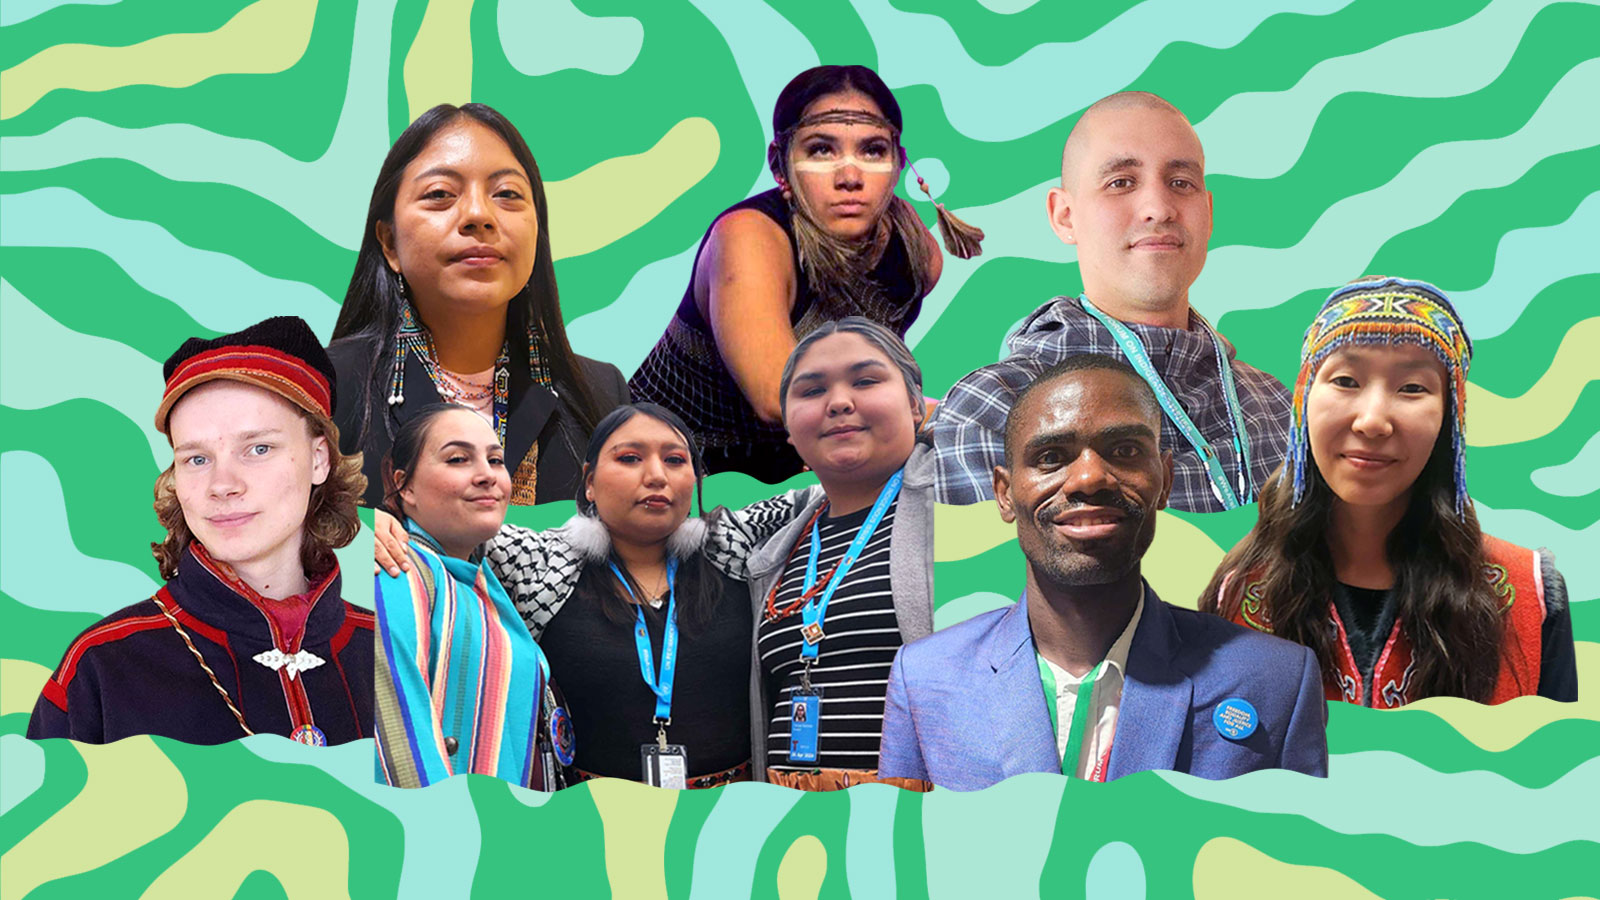 From Australia to the Arctic, young Indigenous changemakers speak out